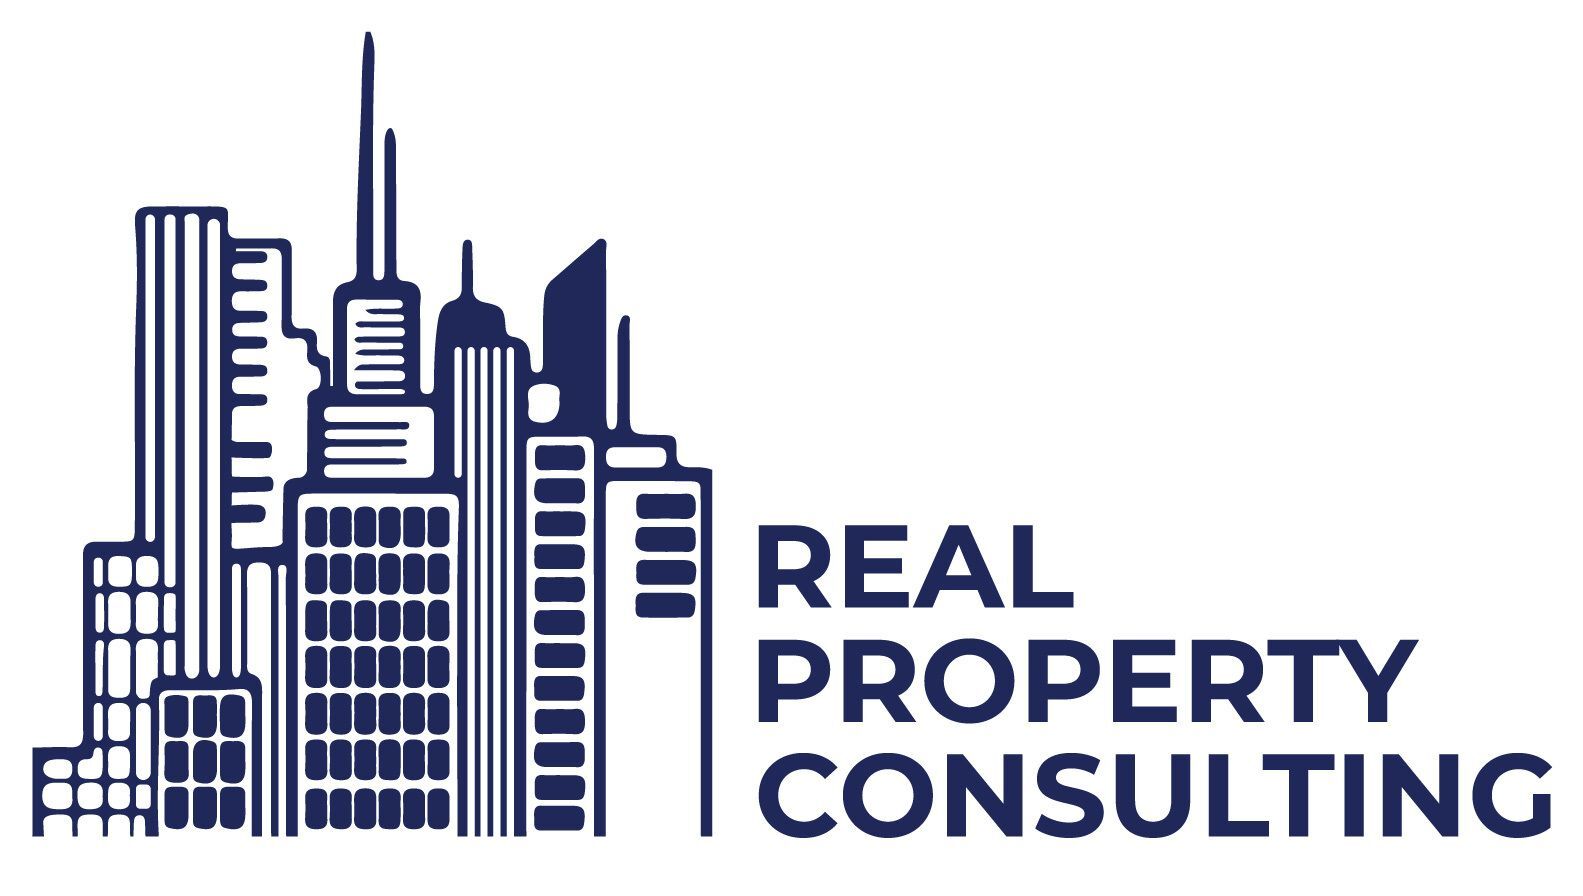 Real Property Consulting